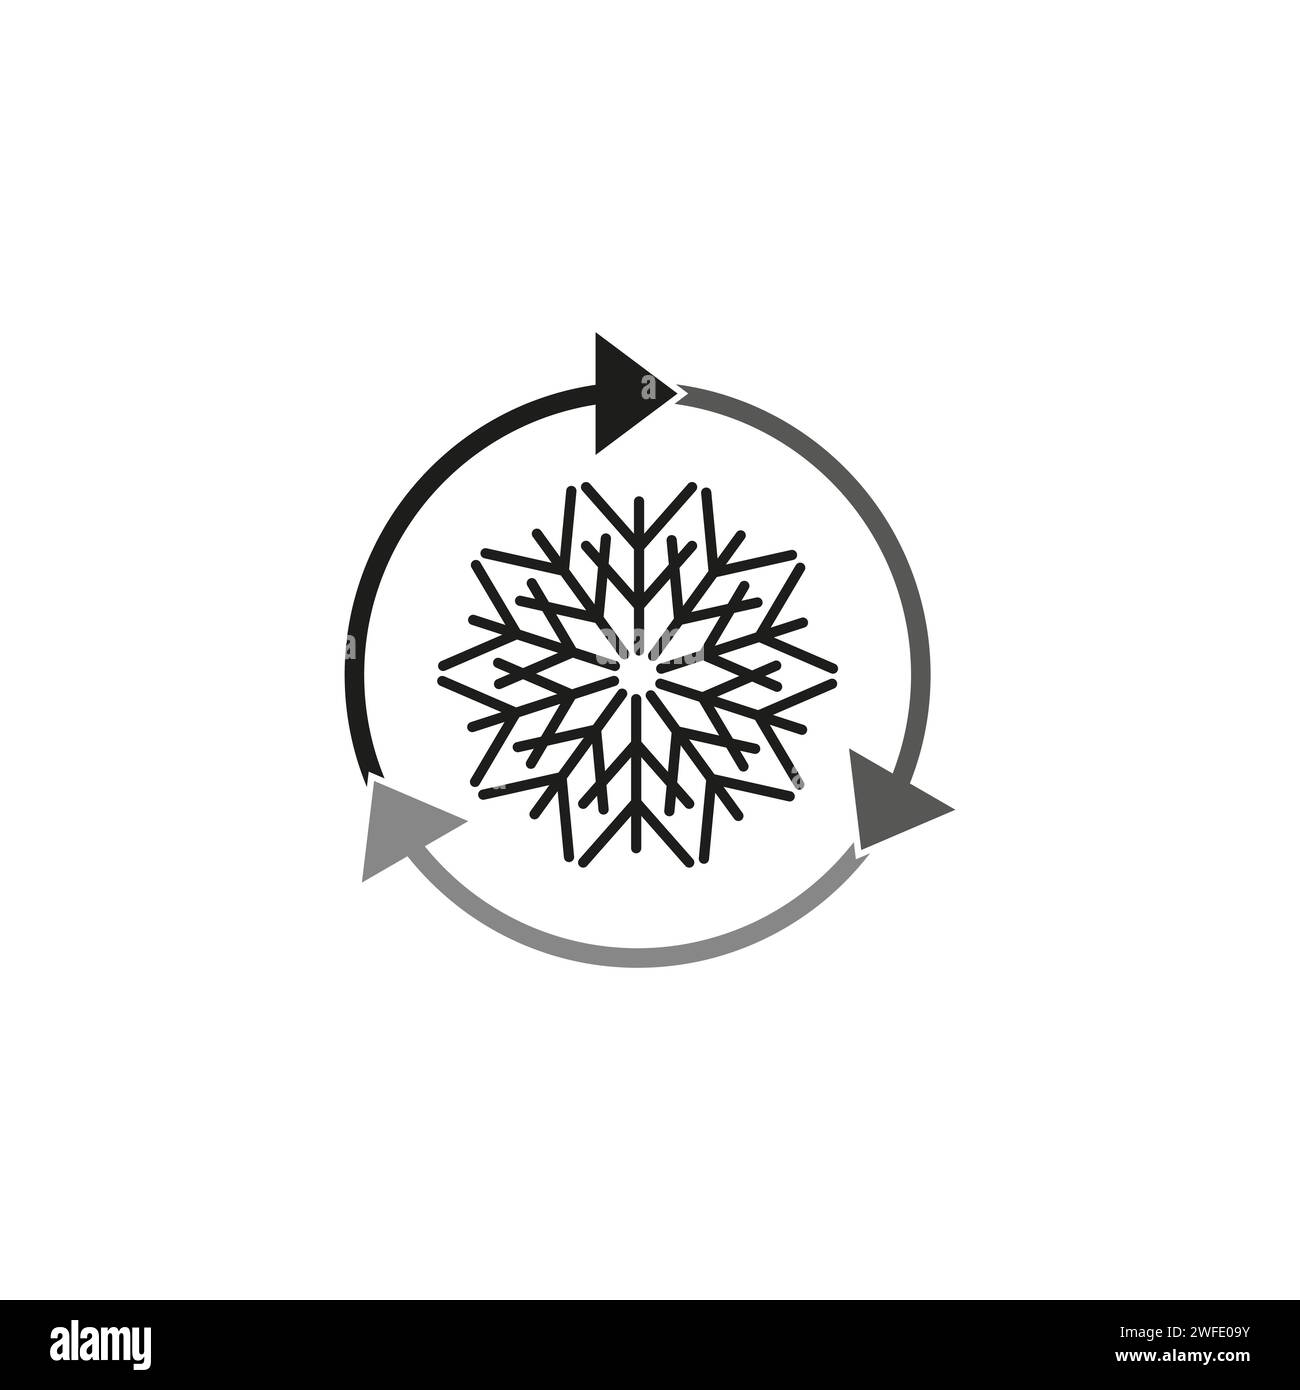 Freezer control icon. Conditioning car or house icon. Auto cooling or defrost icon. Snowflake with three rotation arrows. Vector illustration. EPS 10. Stock Vector